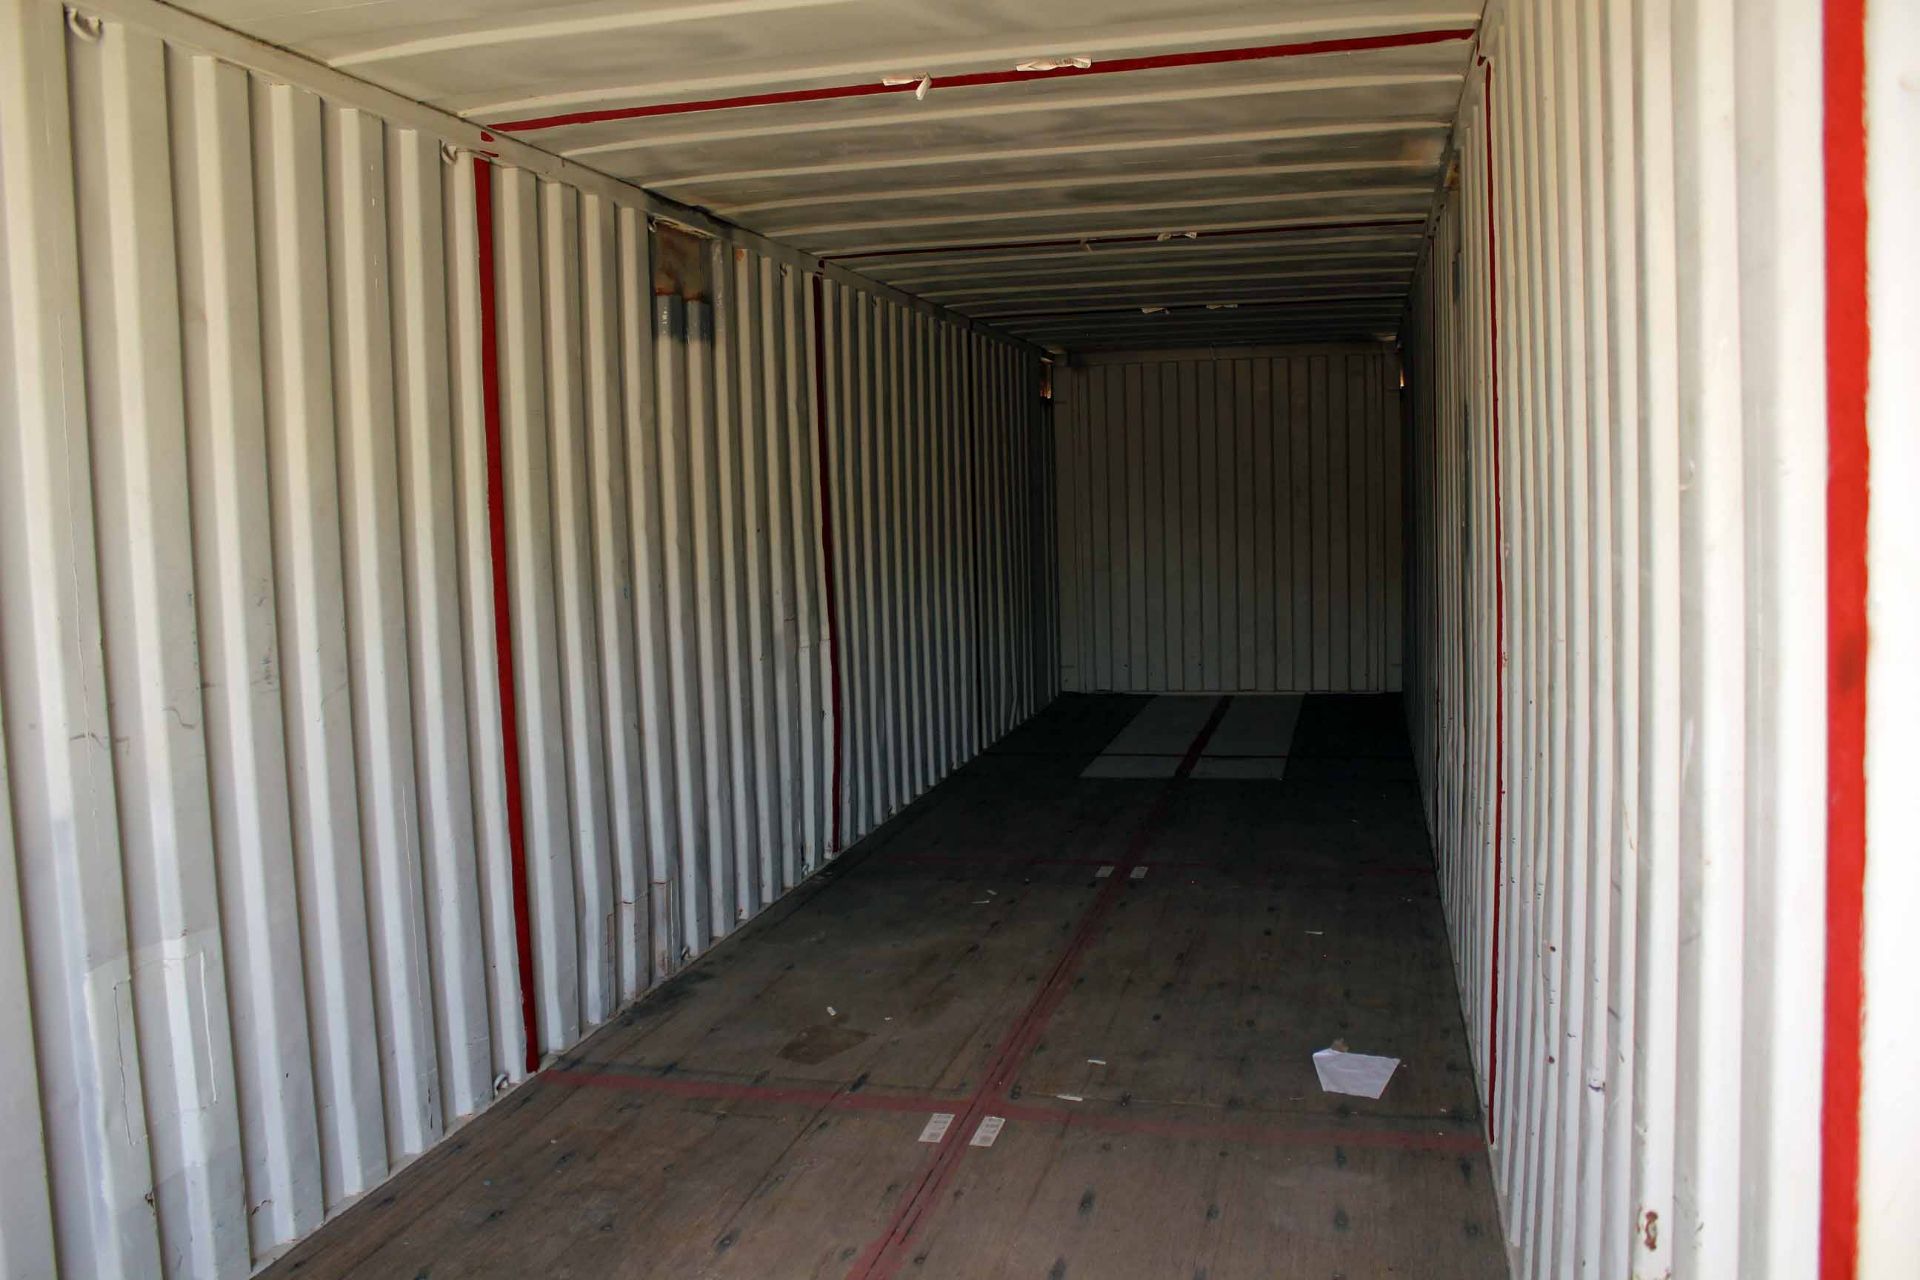 STEEL STORAGE CONTAINER, 40'L. x 96"W. x 8' ht., dbl. swing-out front doors (Unit BSSL4437545) - Image 2 of 4